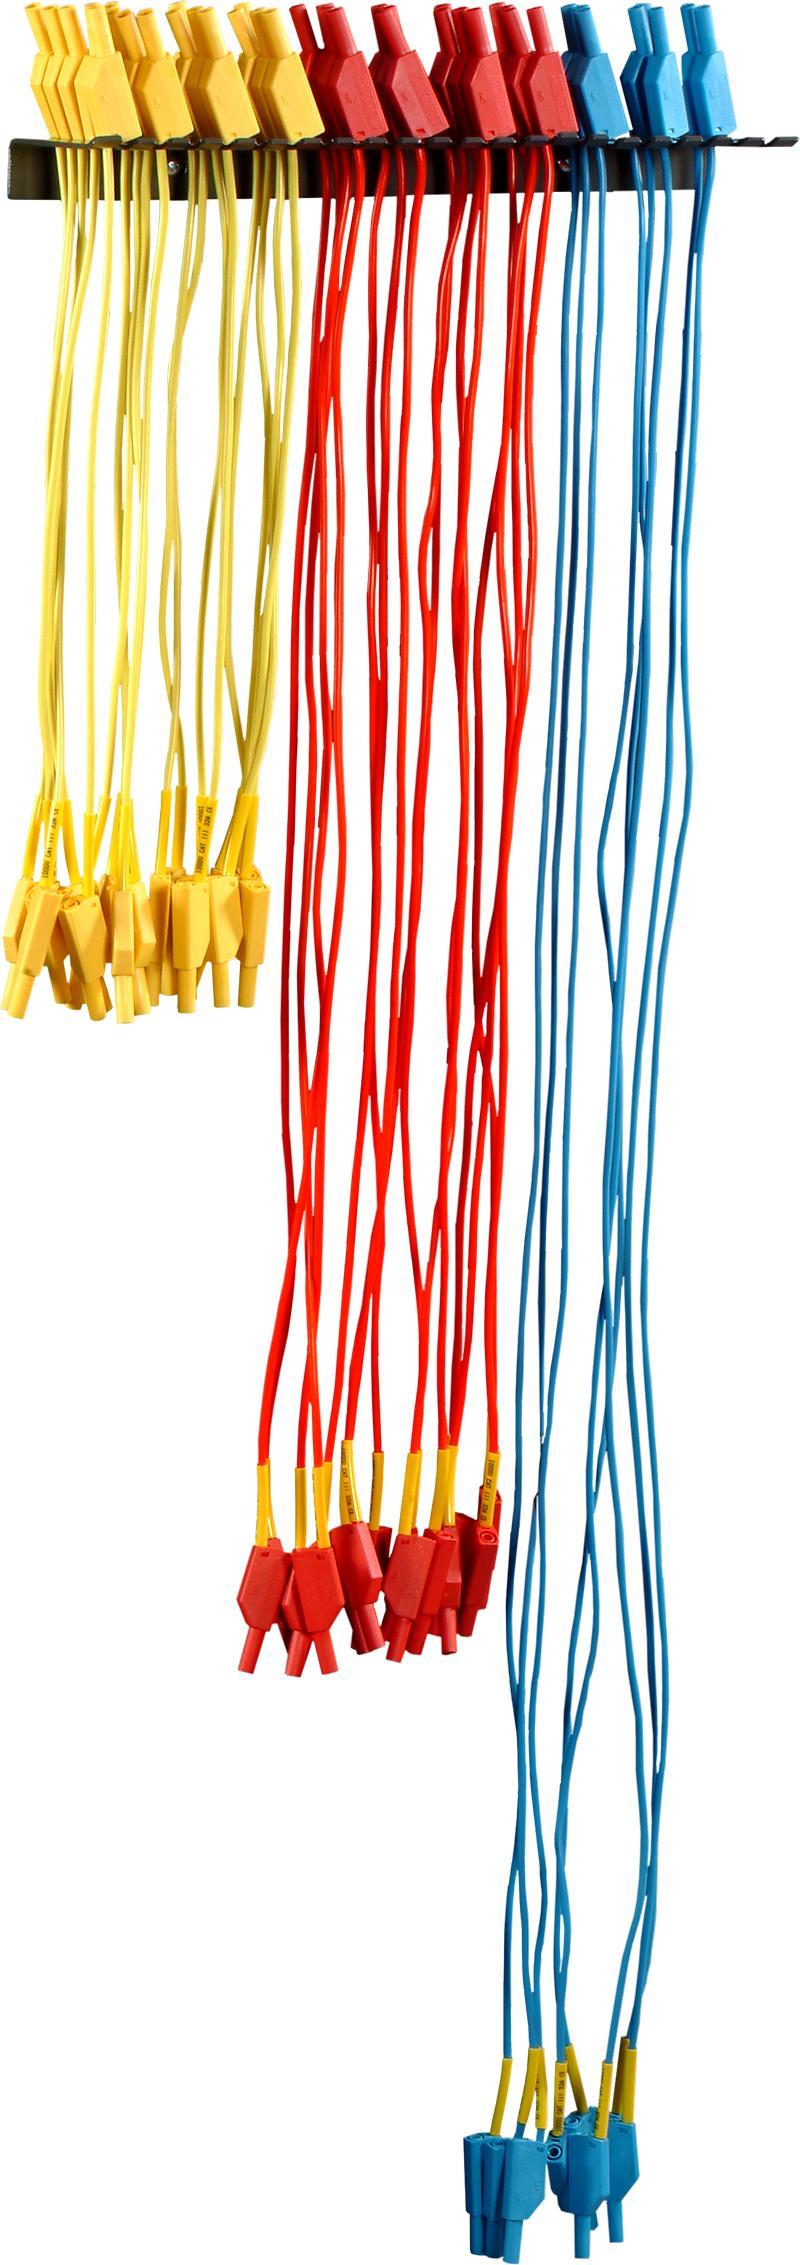 77 in) 354 g (0.78 lb) Connection Lead Set 8952-00 The Connection Lead Set consist of PVC-covered, extra-flexible leads terminated with stacking 4 mm safety banana plugs.